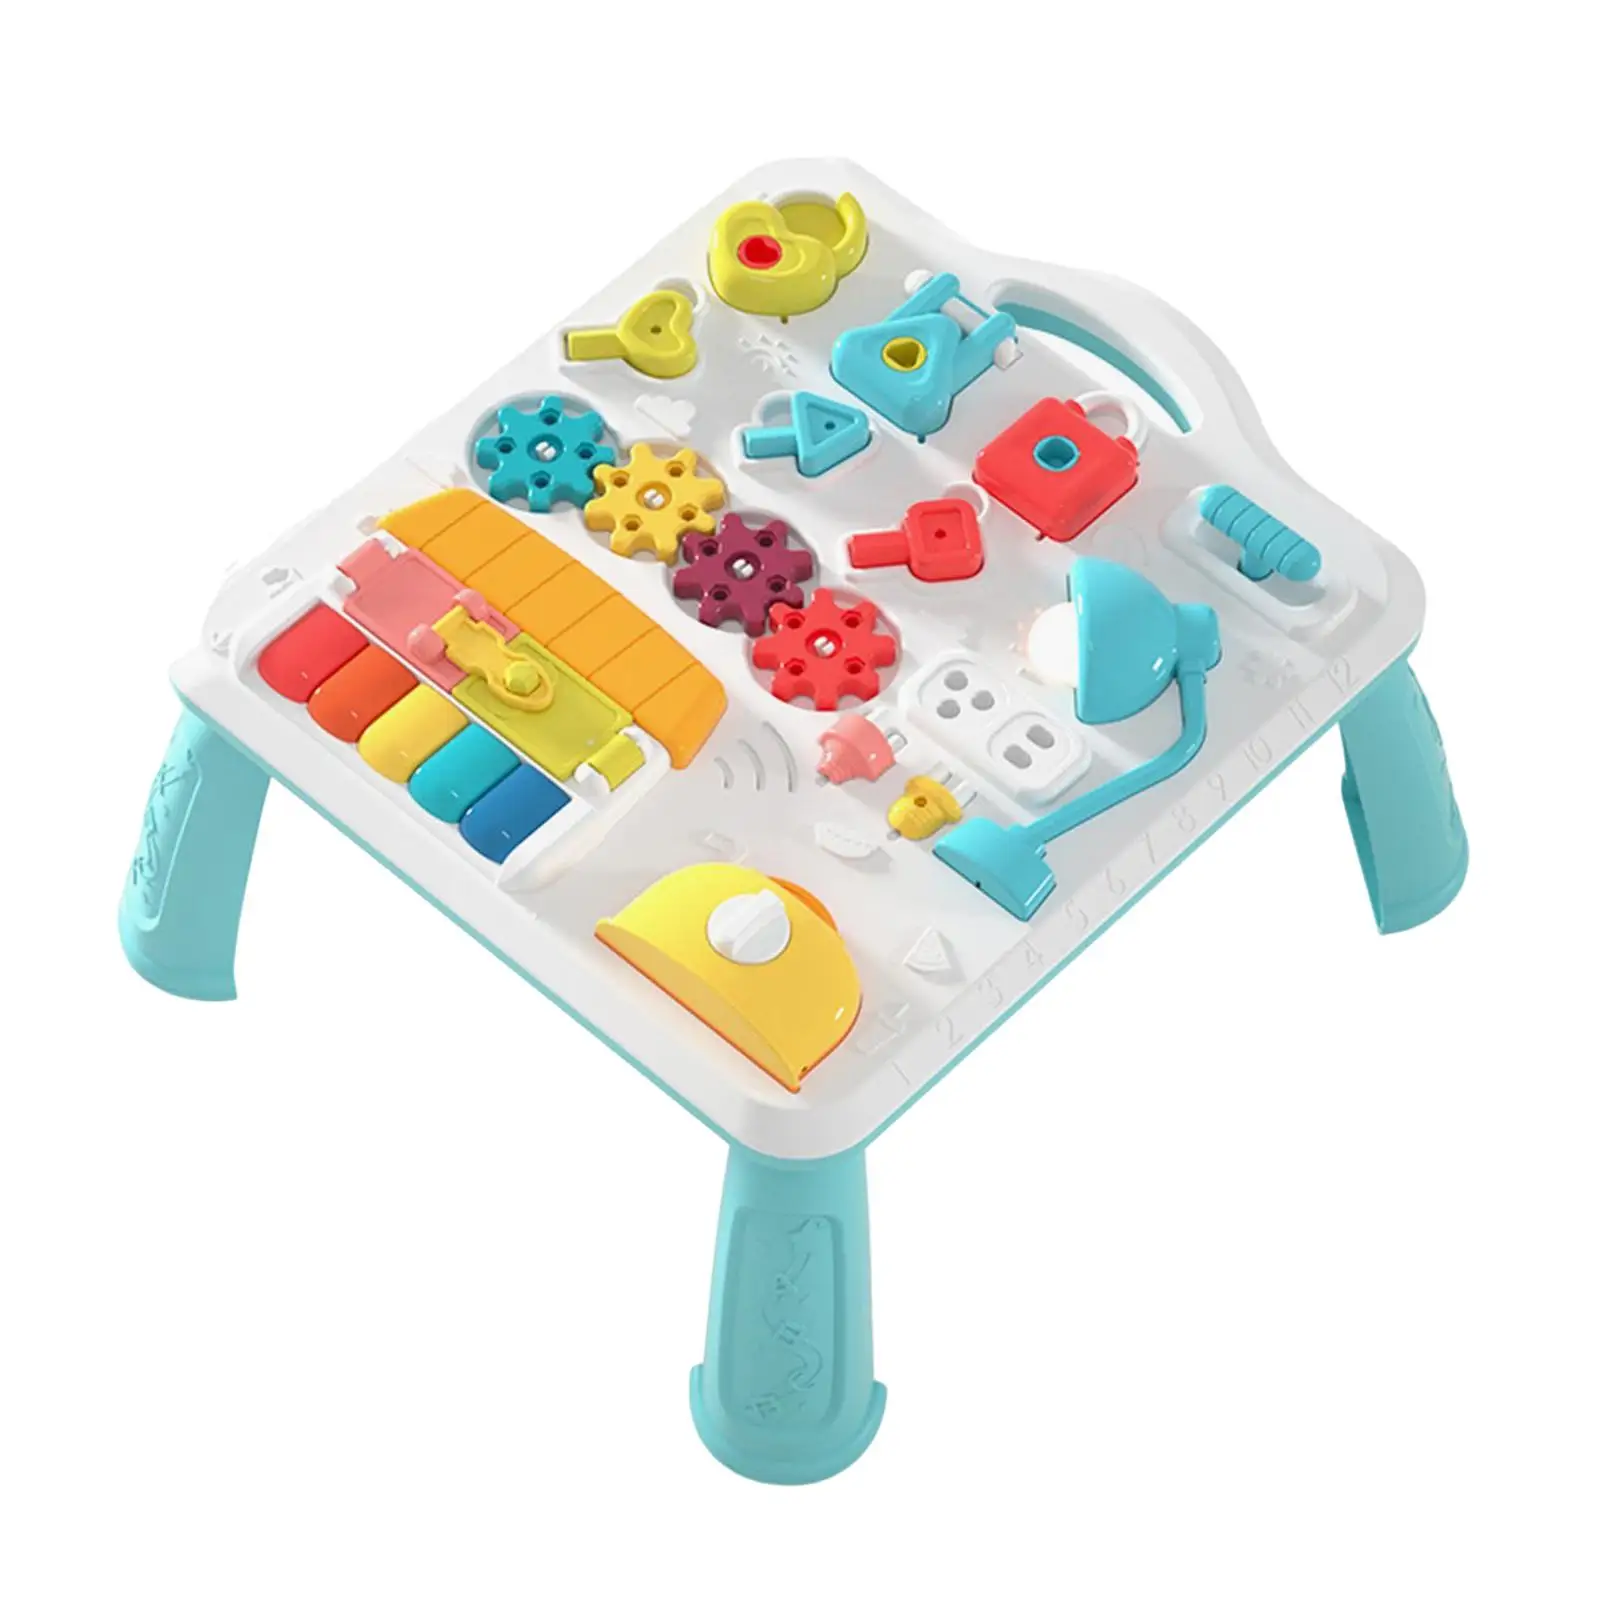 Learning Table Early Education toys Detachable with Leg Support Busy Table for Gift Girls